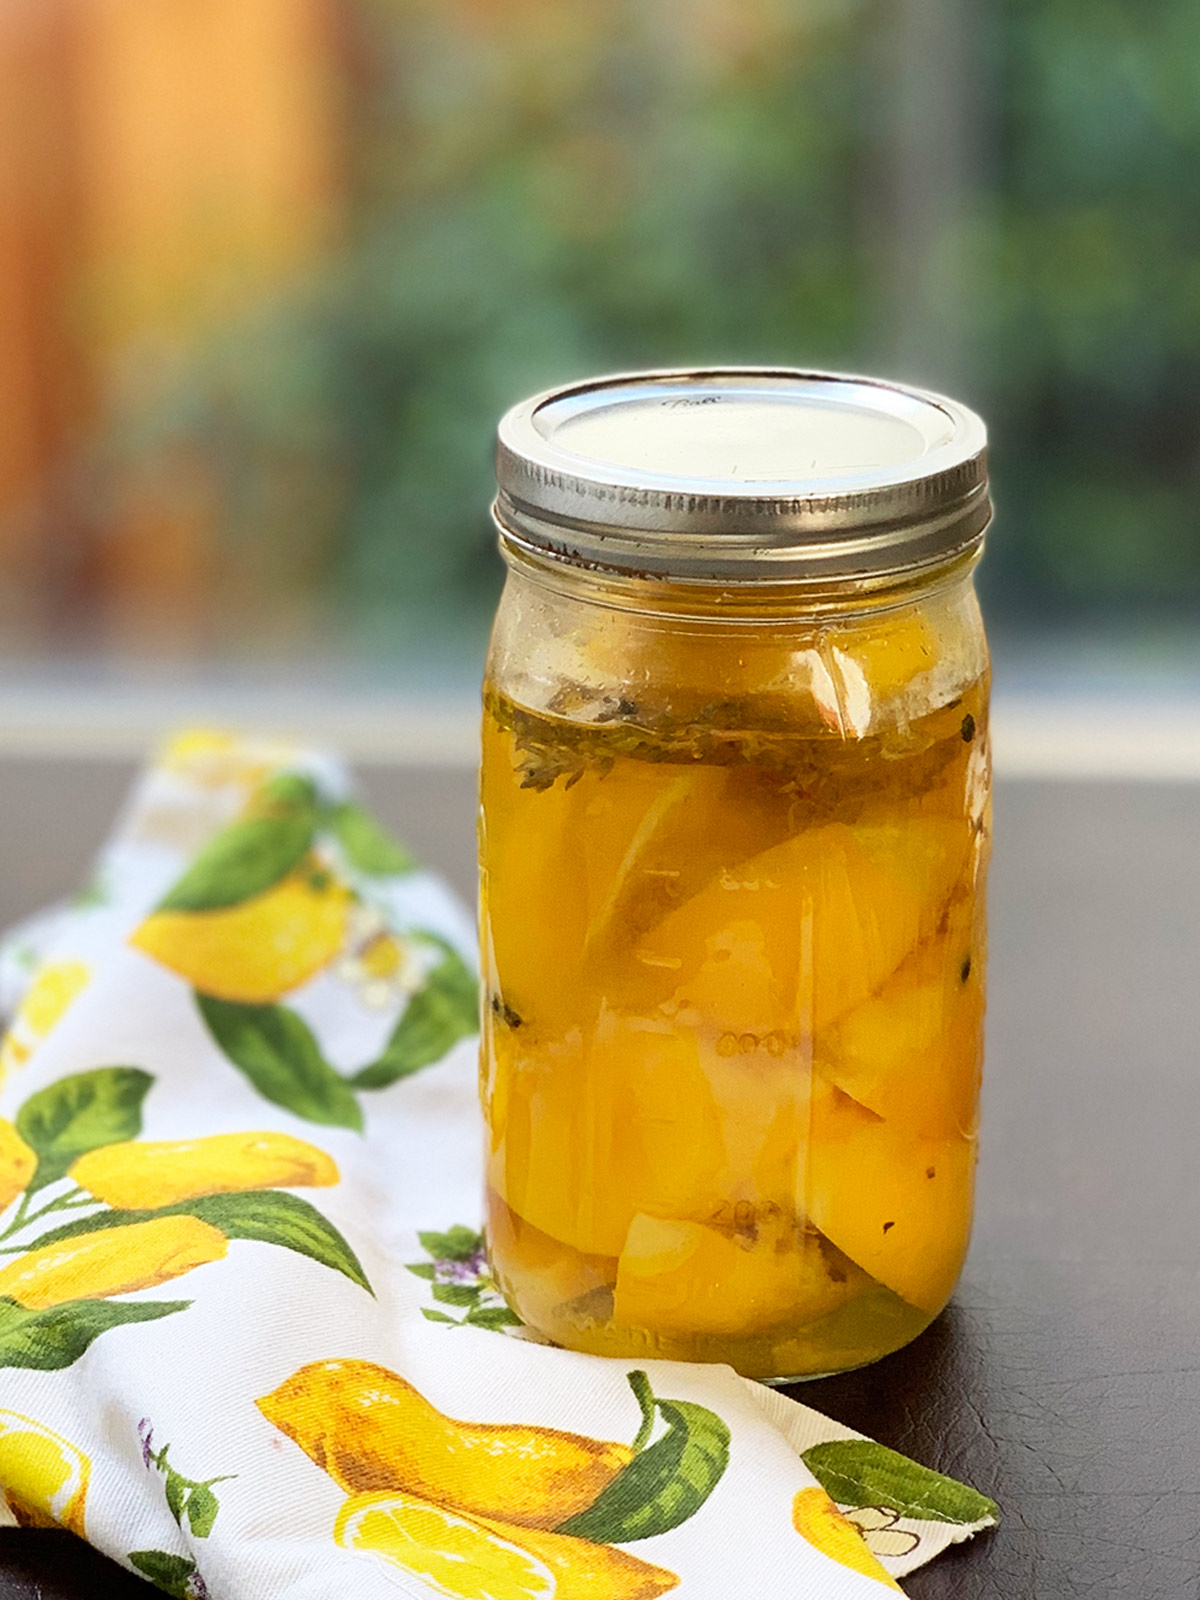 Preserved lemons ready to eat in a jar with a lemon napkin next to it.